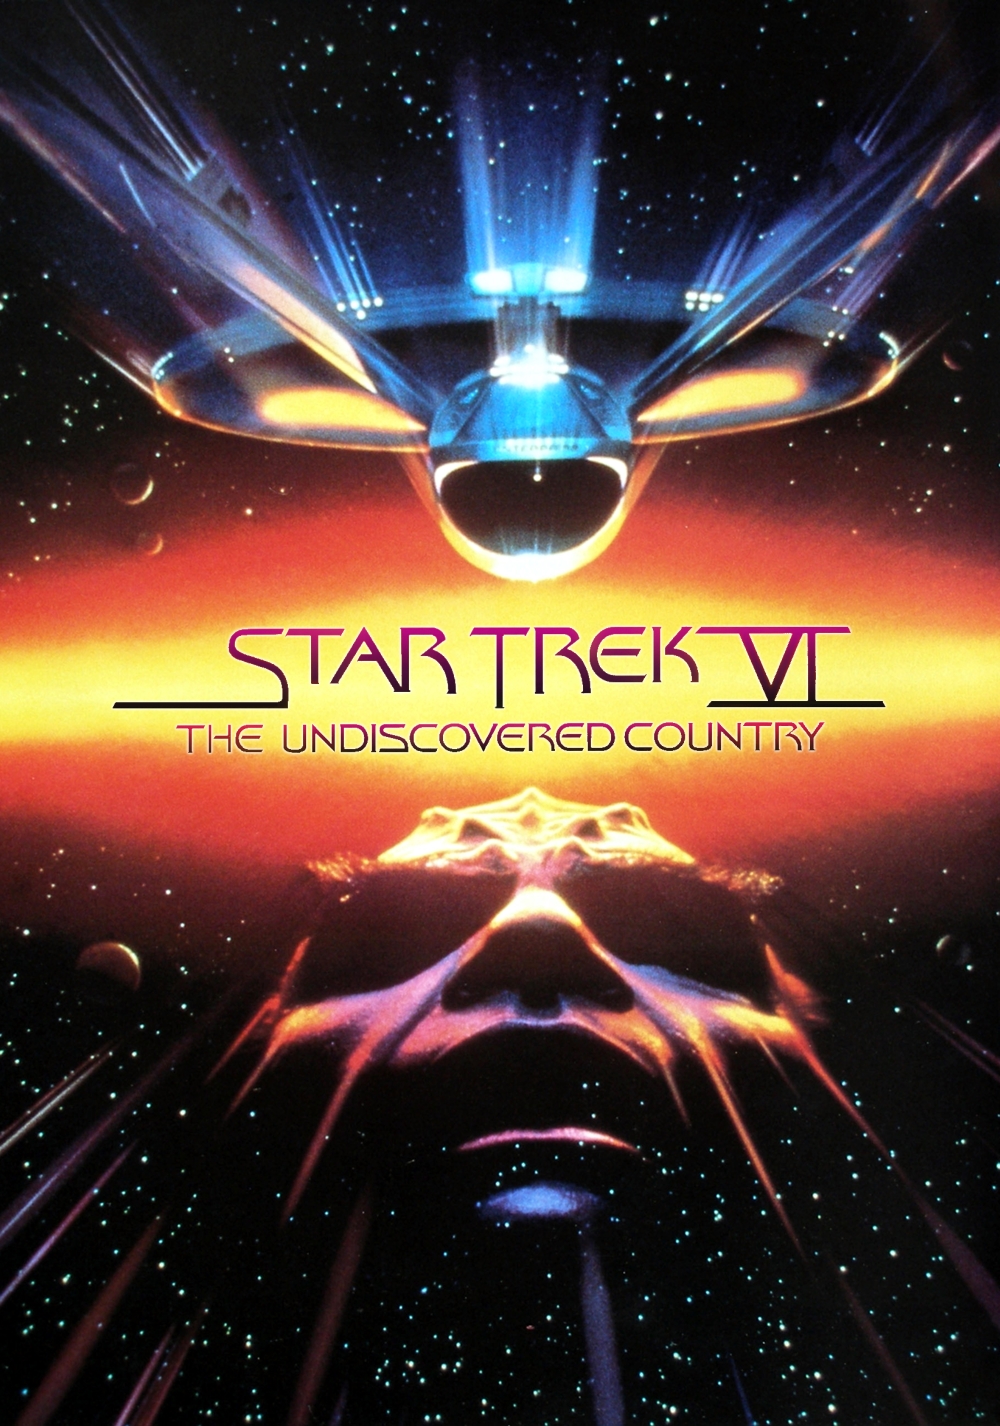 Star Trek VI: The Undiscovered Country #15